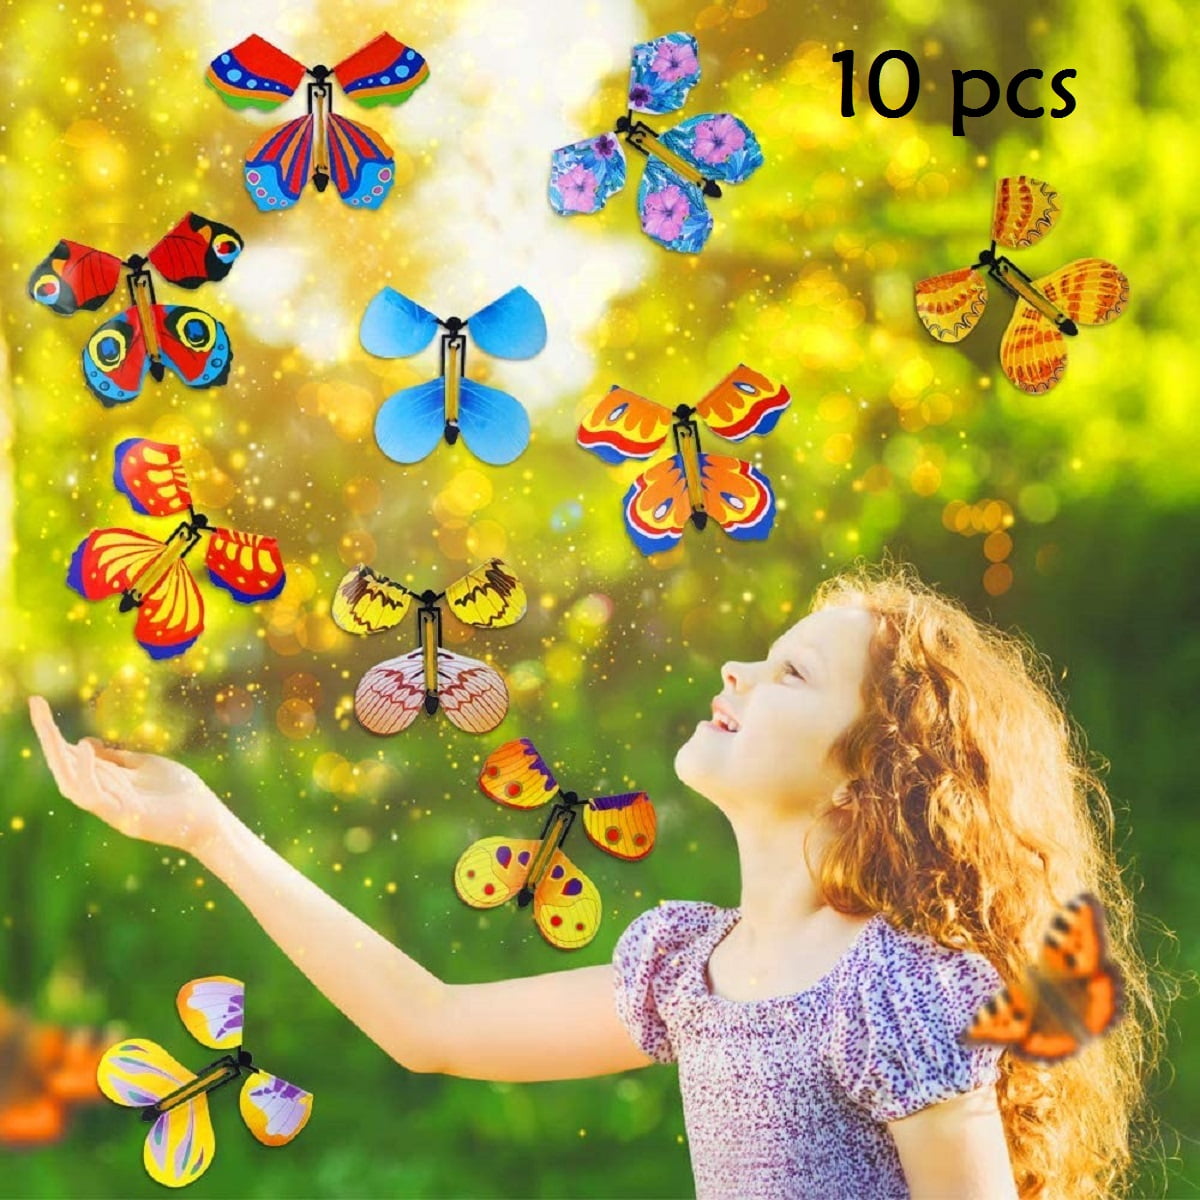 10Pcs Magic Flying Butterfly Wind Up Butterfly in The Book Fairy Toy Great Surprise Wedding